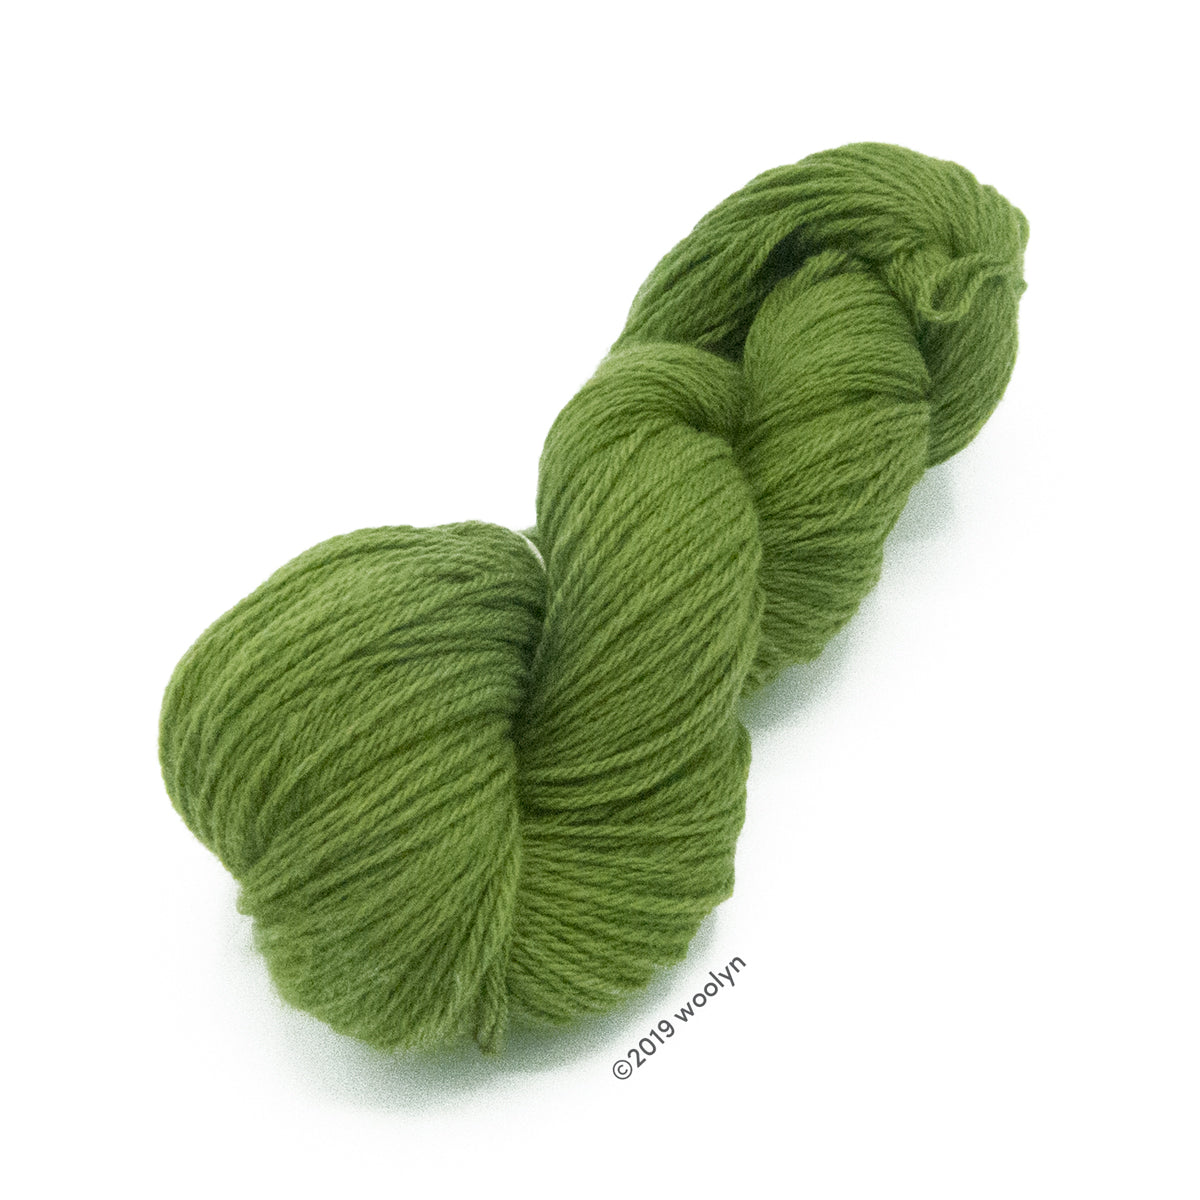 North Light Fibers Spring St in Kelp, a leafy green color.